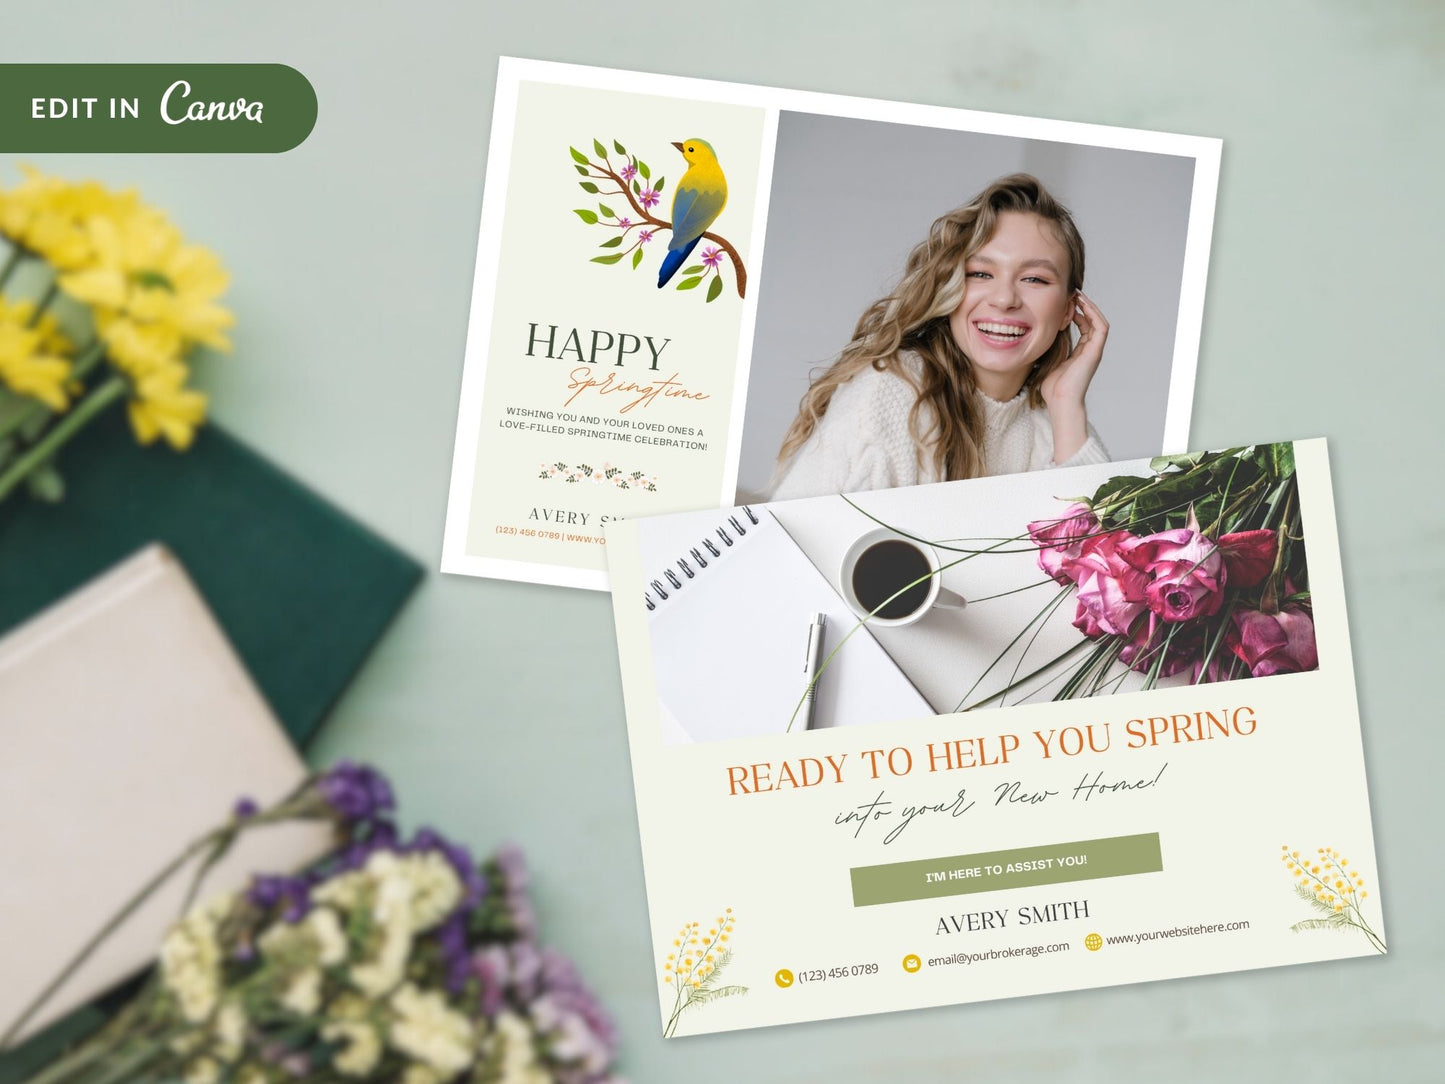 Spring Postcard Bundle - Eye-catching postcards for vibrant real estate marketing in the spring season.